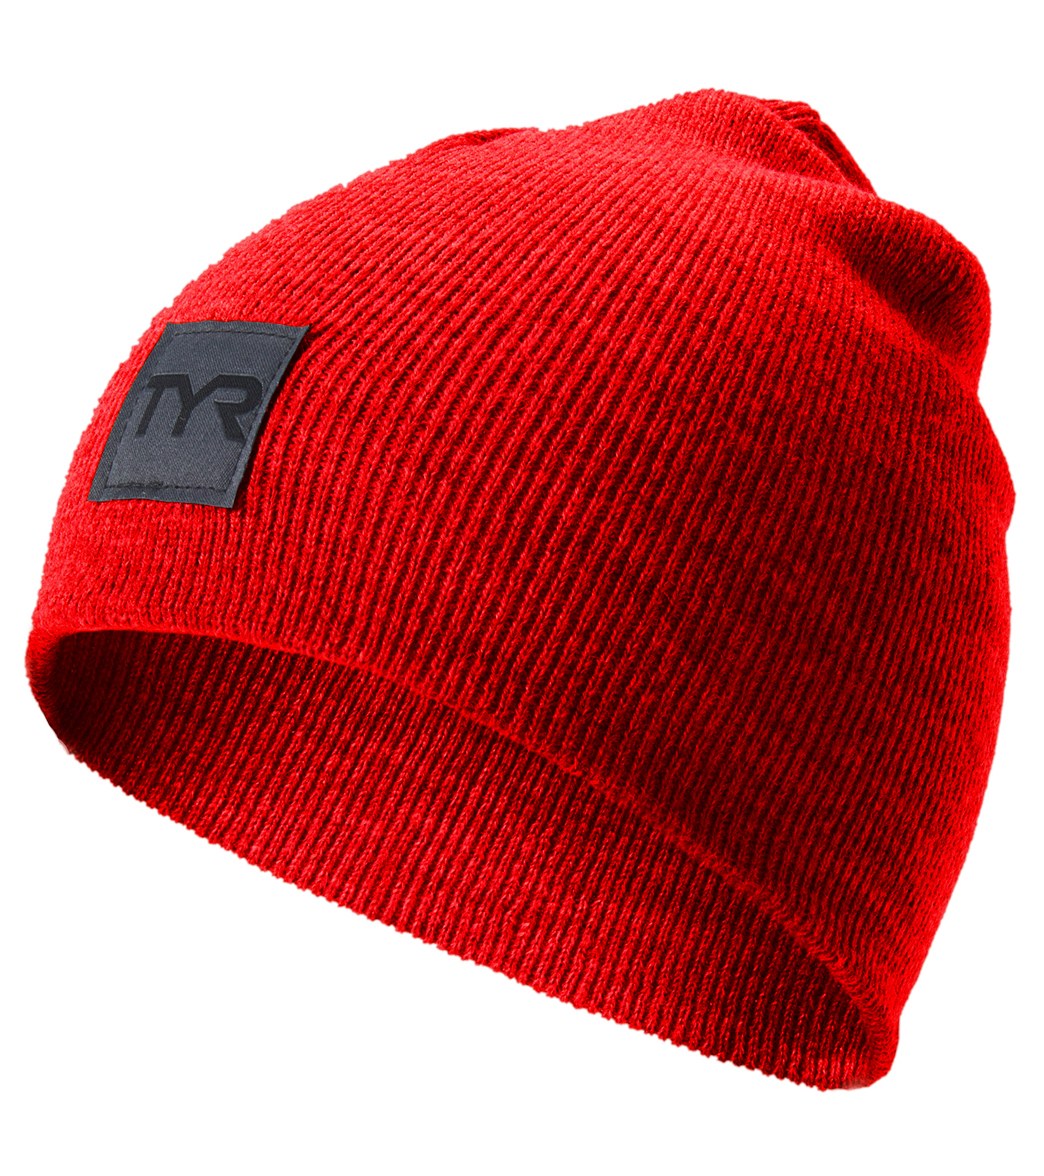 TYR Knit Beanie - Red One Size - Swimoutlet.com